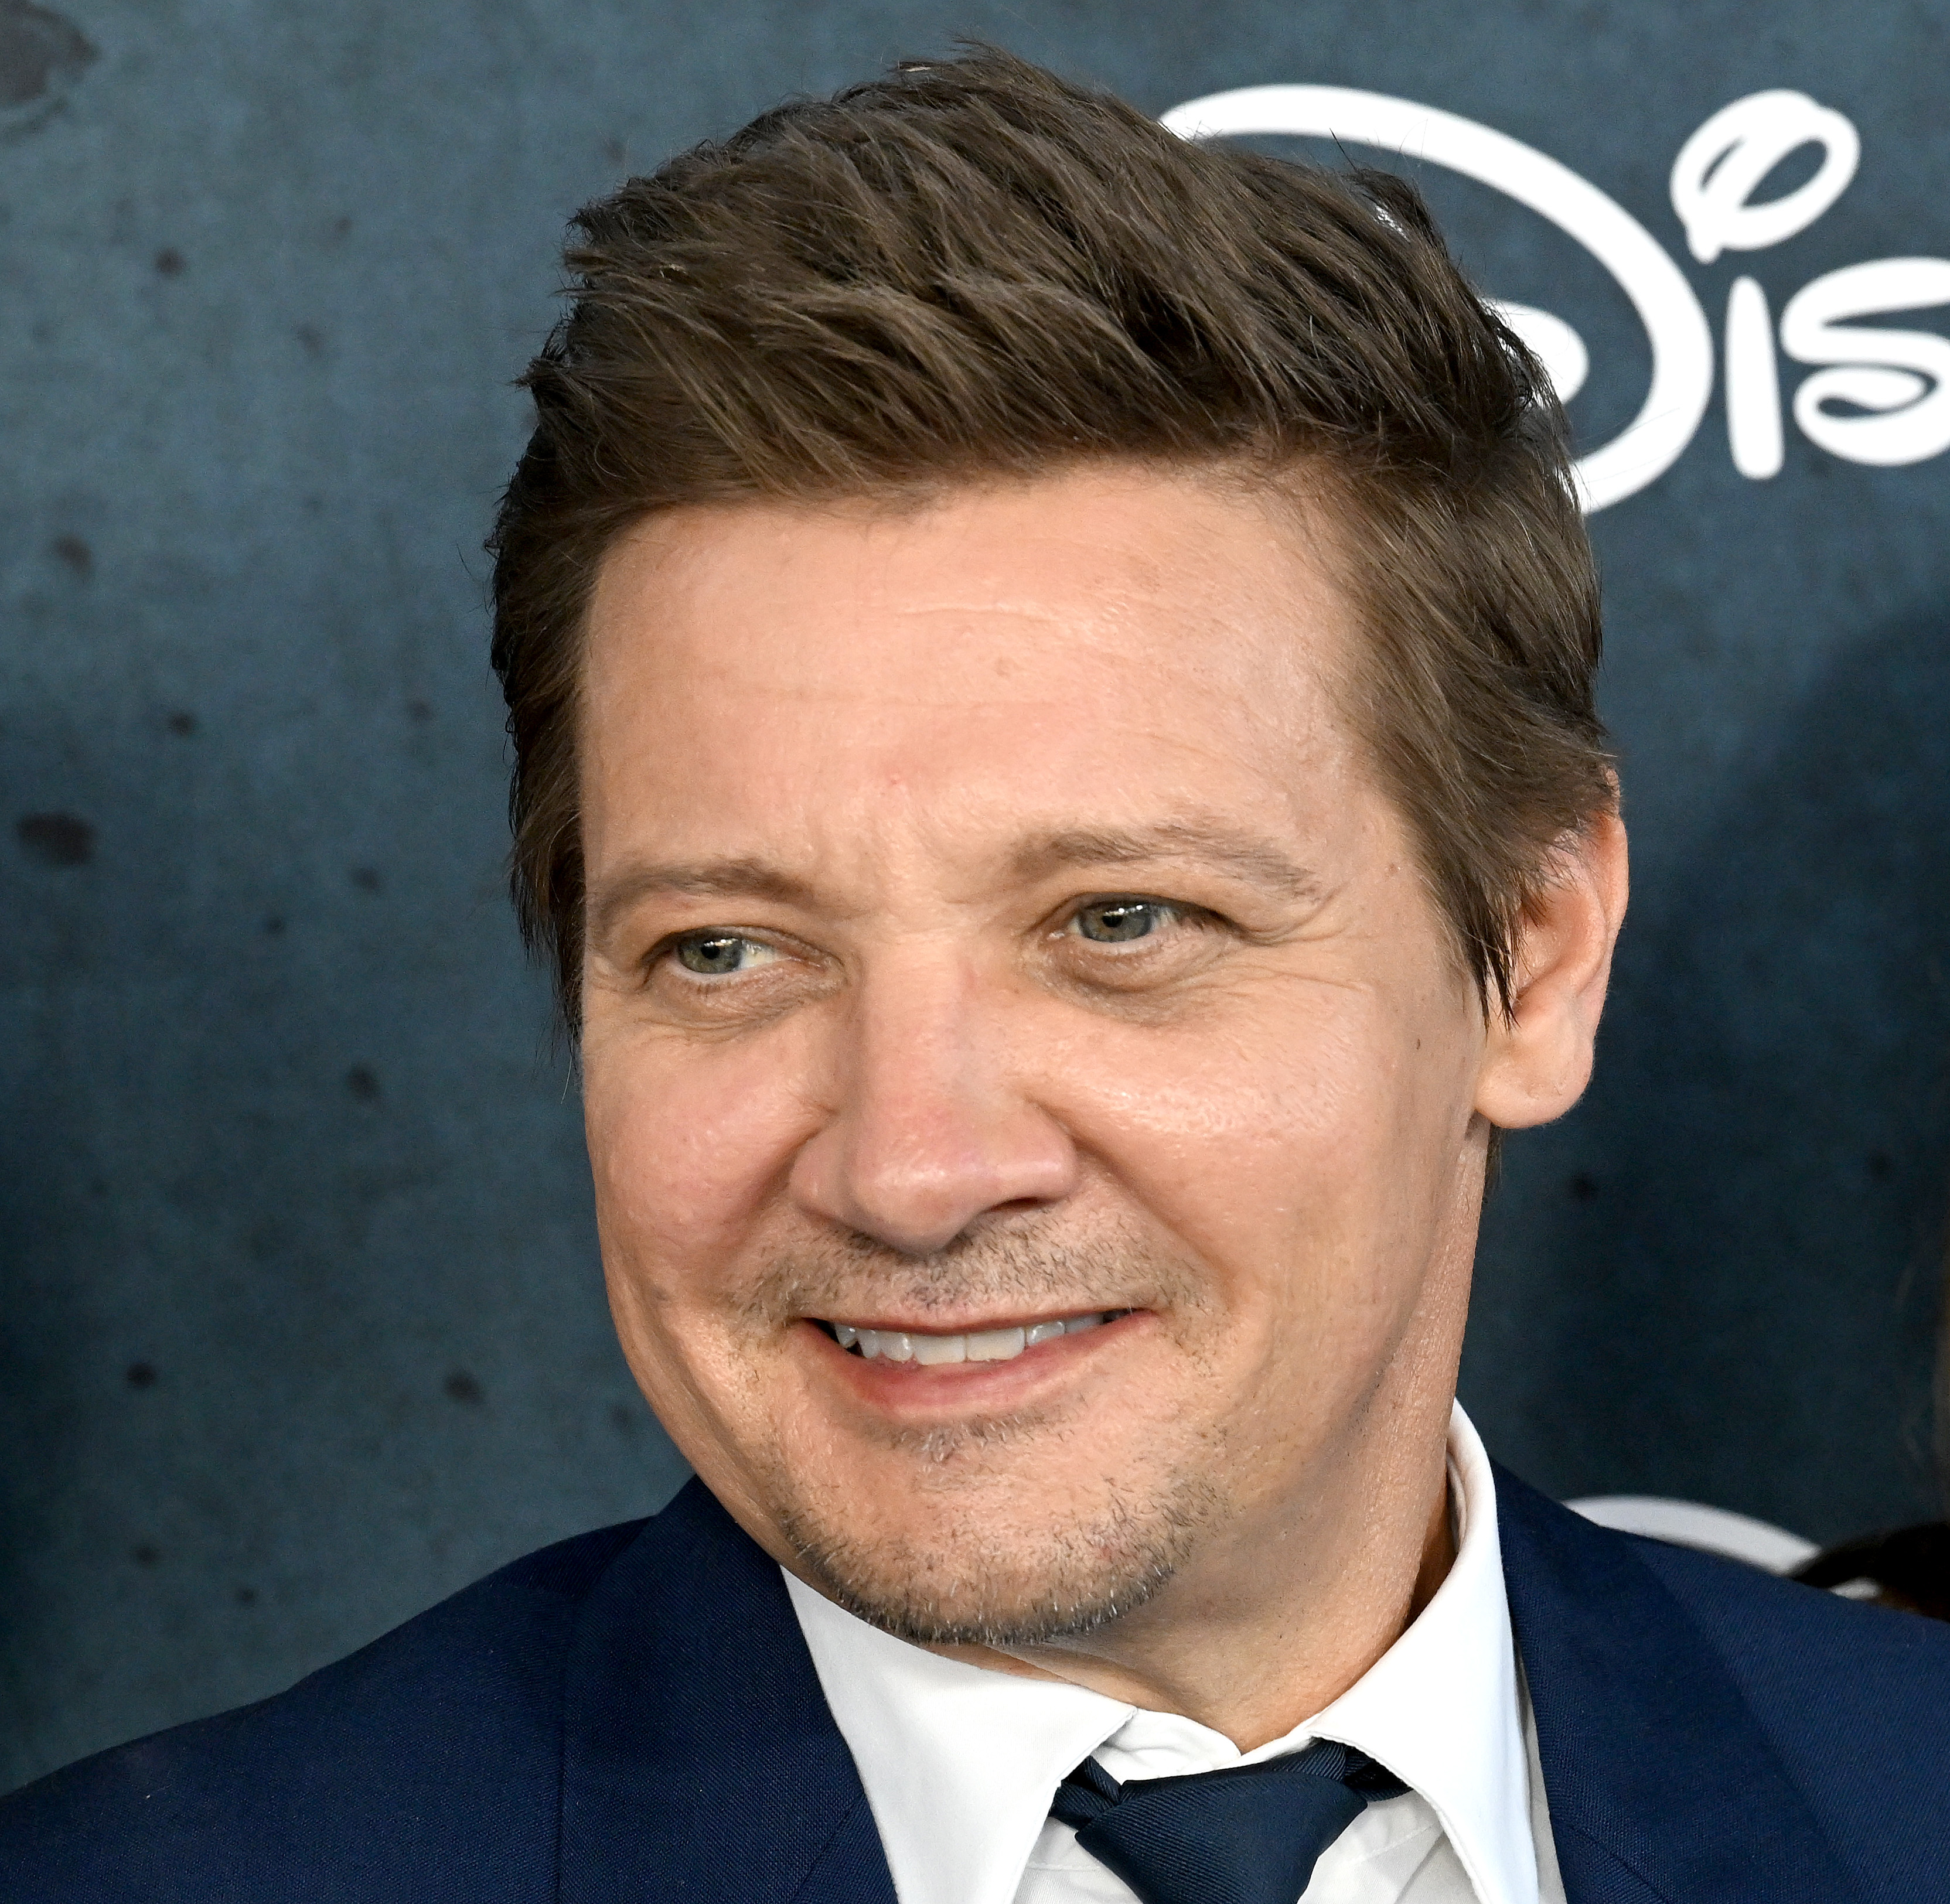 Jeremy Renner attends the premiere of "Rennervations" on April 11, 2023 in Los Angeles, California | Source: Getty Images